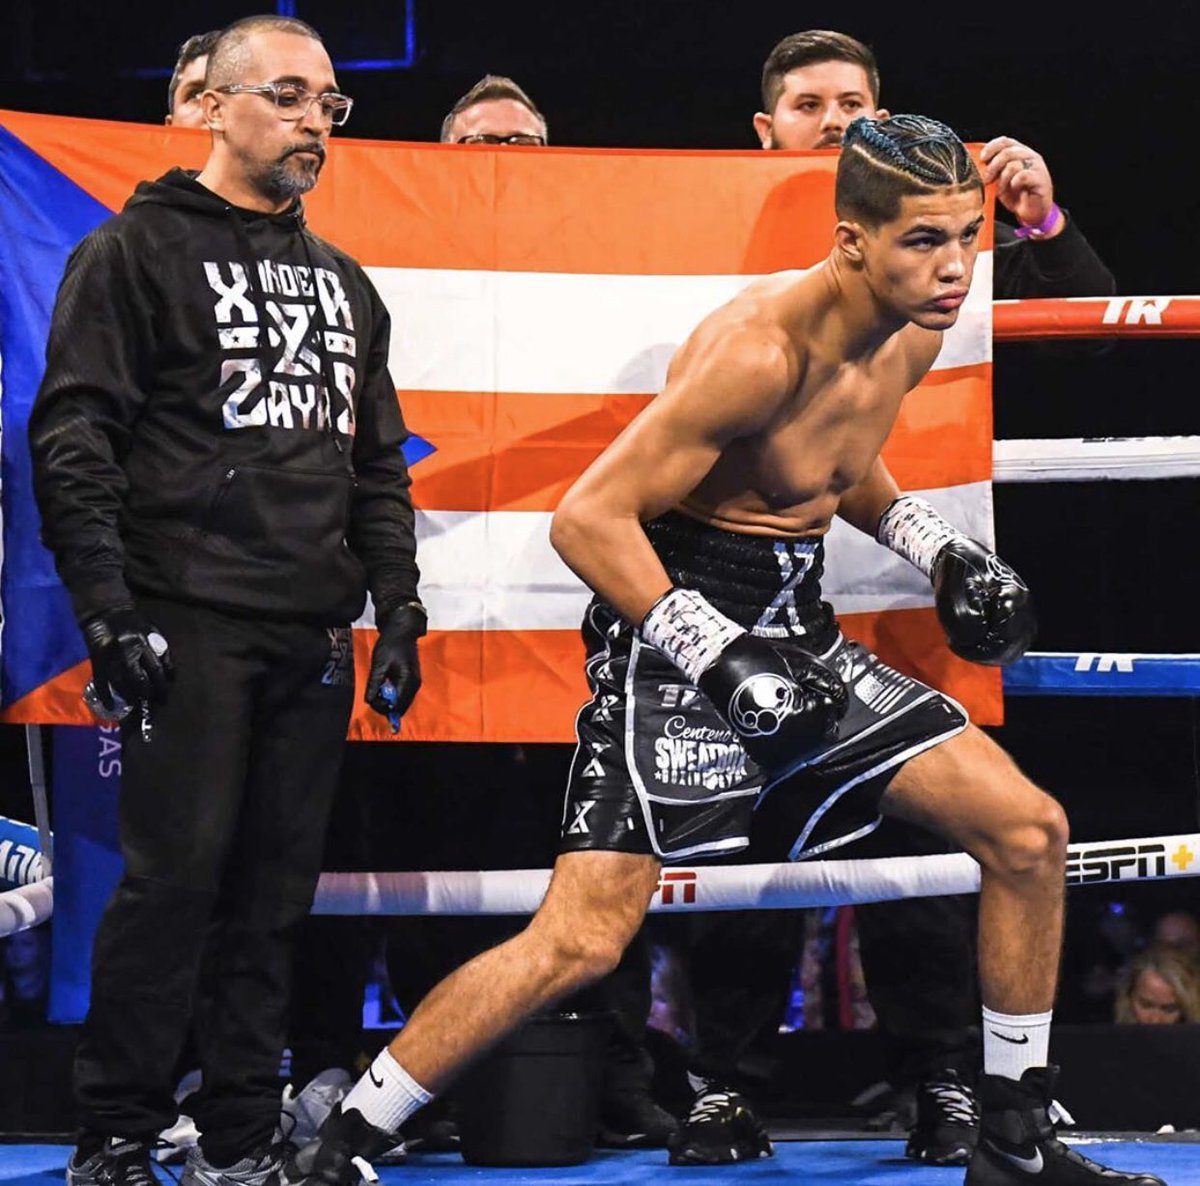 Conquering One Arena At A Time 🥊 The FTWR® Brand 🇺🇸 ftwrbrand.com #teamxander #thebrand #ftwr #ftwrbrand #boxing #boxinglife #mma #warready #fightlife #ftwrfamily  @XanderZayas @sweatboxboxing @peterkahn